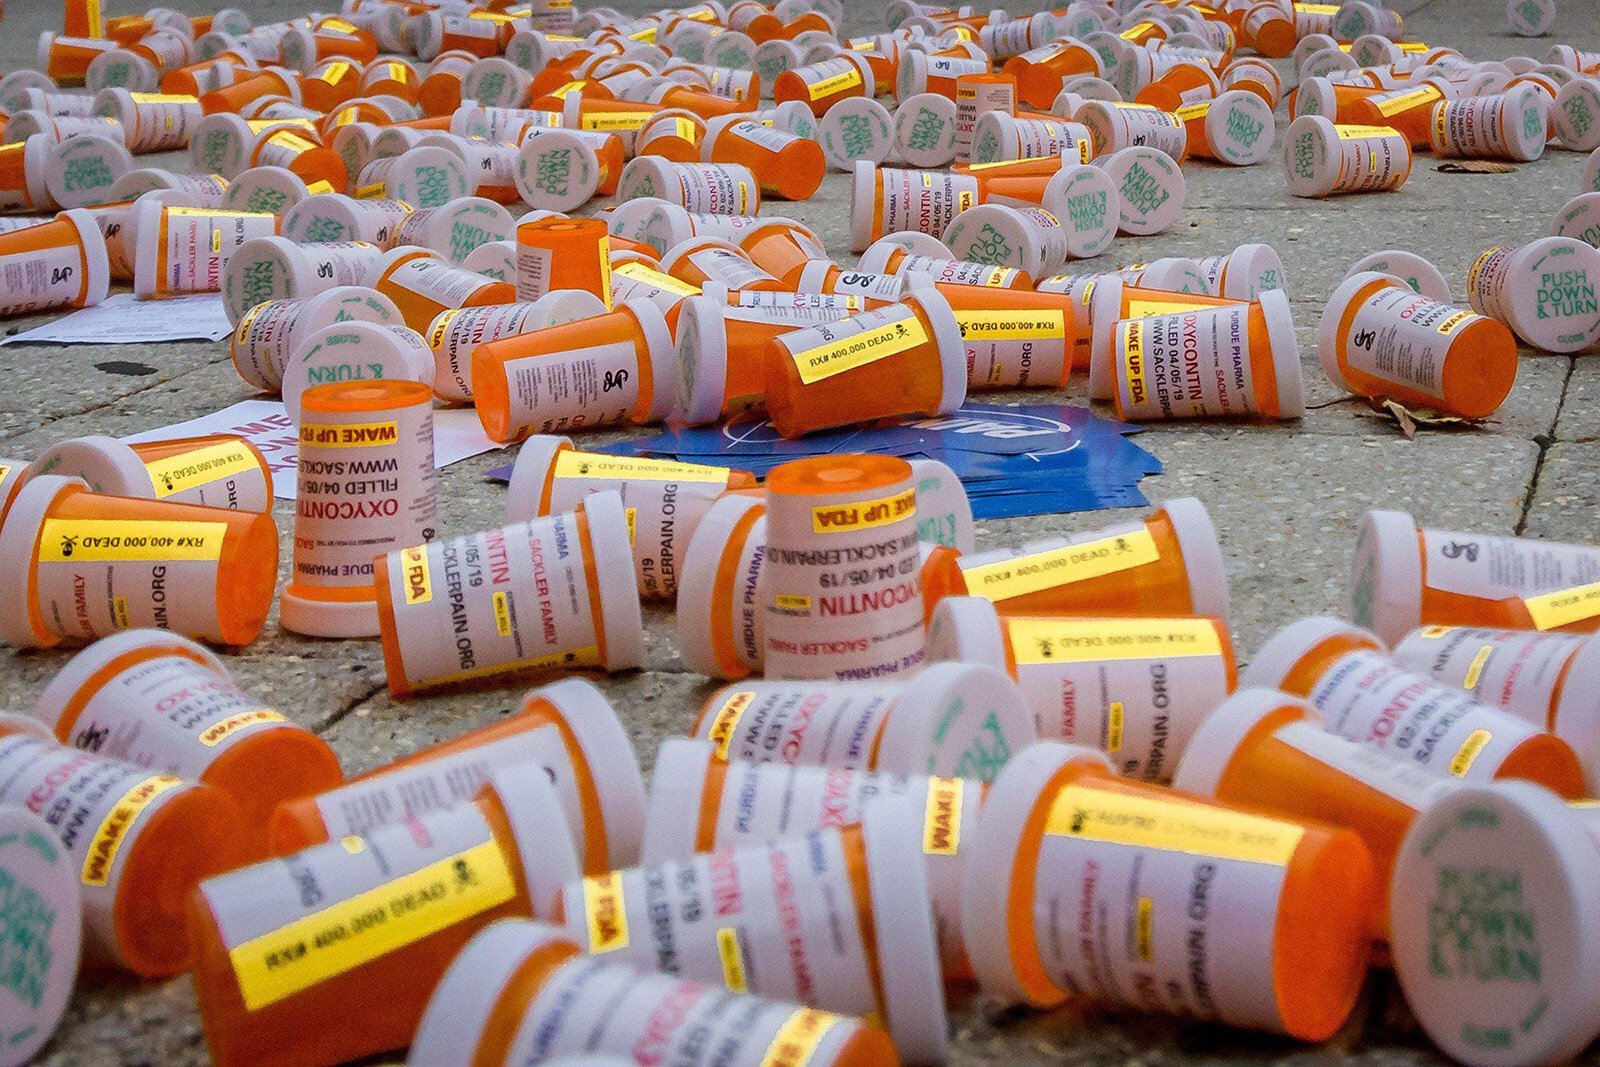 US overdose deaths have been rising for more than two decades, but they accelerated in the past two years – jumping more than 20 per cent in the latest year alone. Photo: TNS